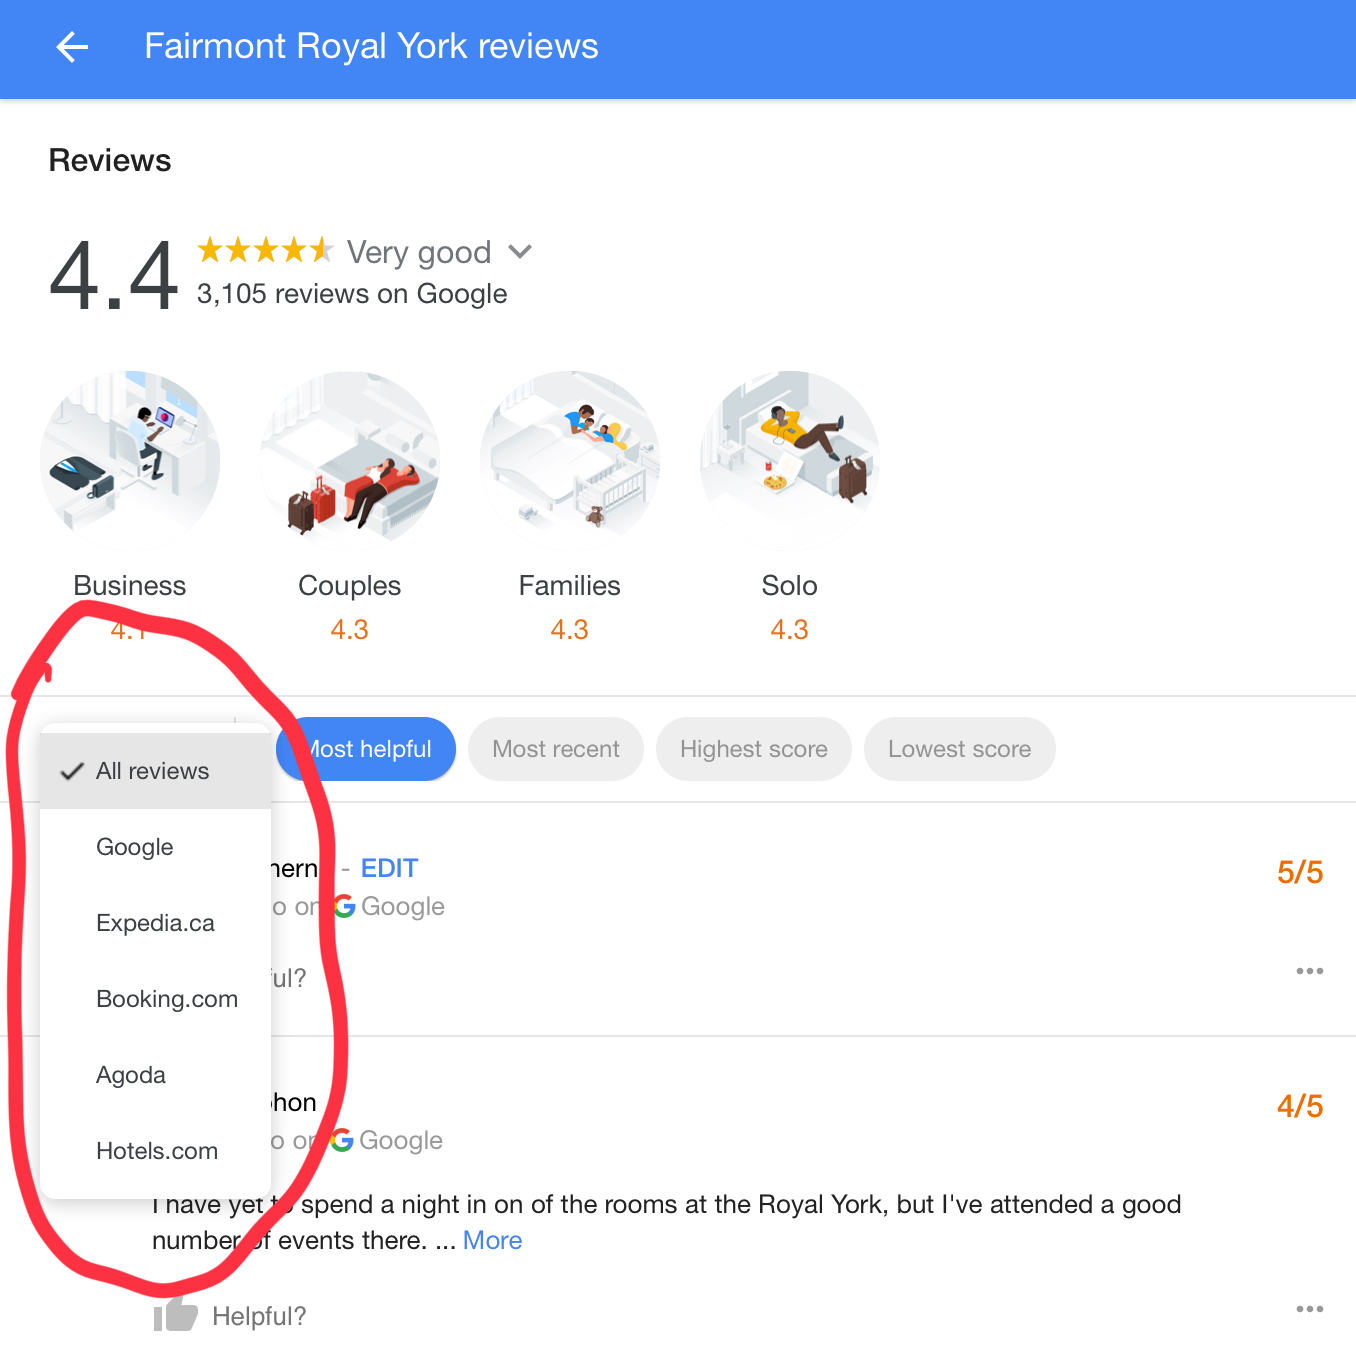 Google Integrating Third Party Reviews in Local Search Results